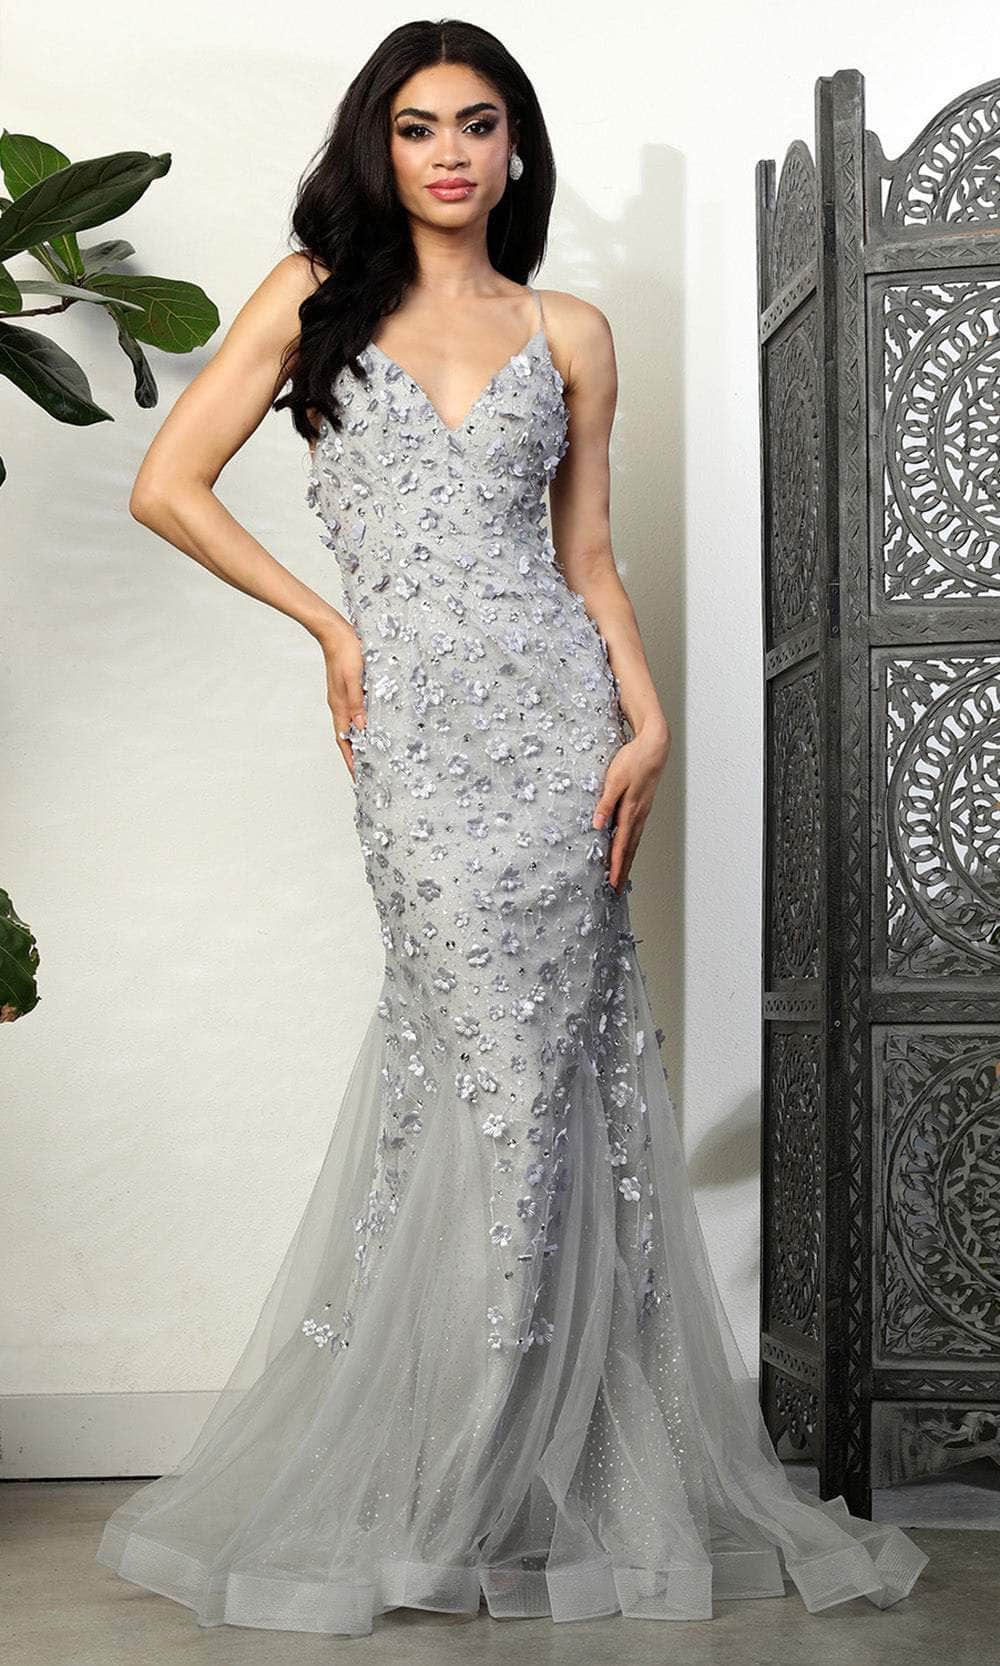 May Queen RQ8089 - 3D Floral Deep V-Neck Prom Gown
